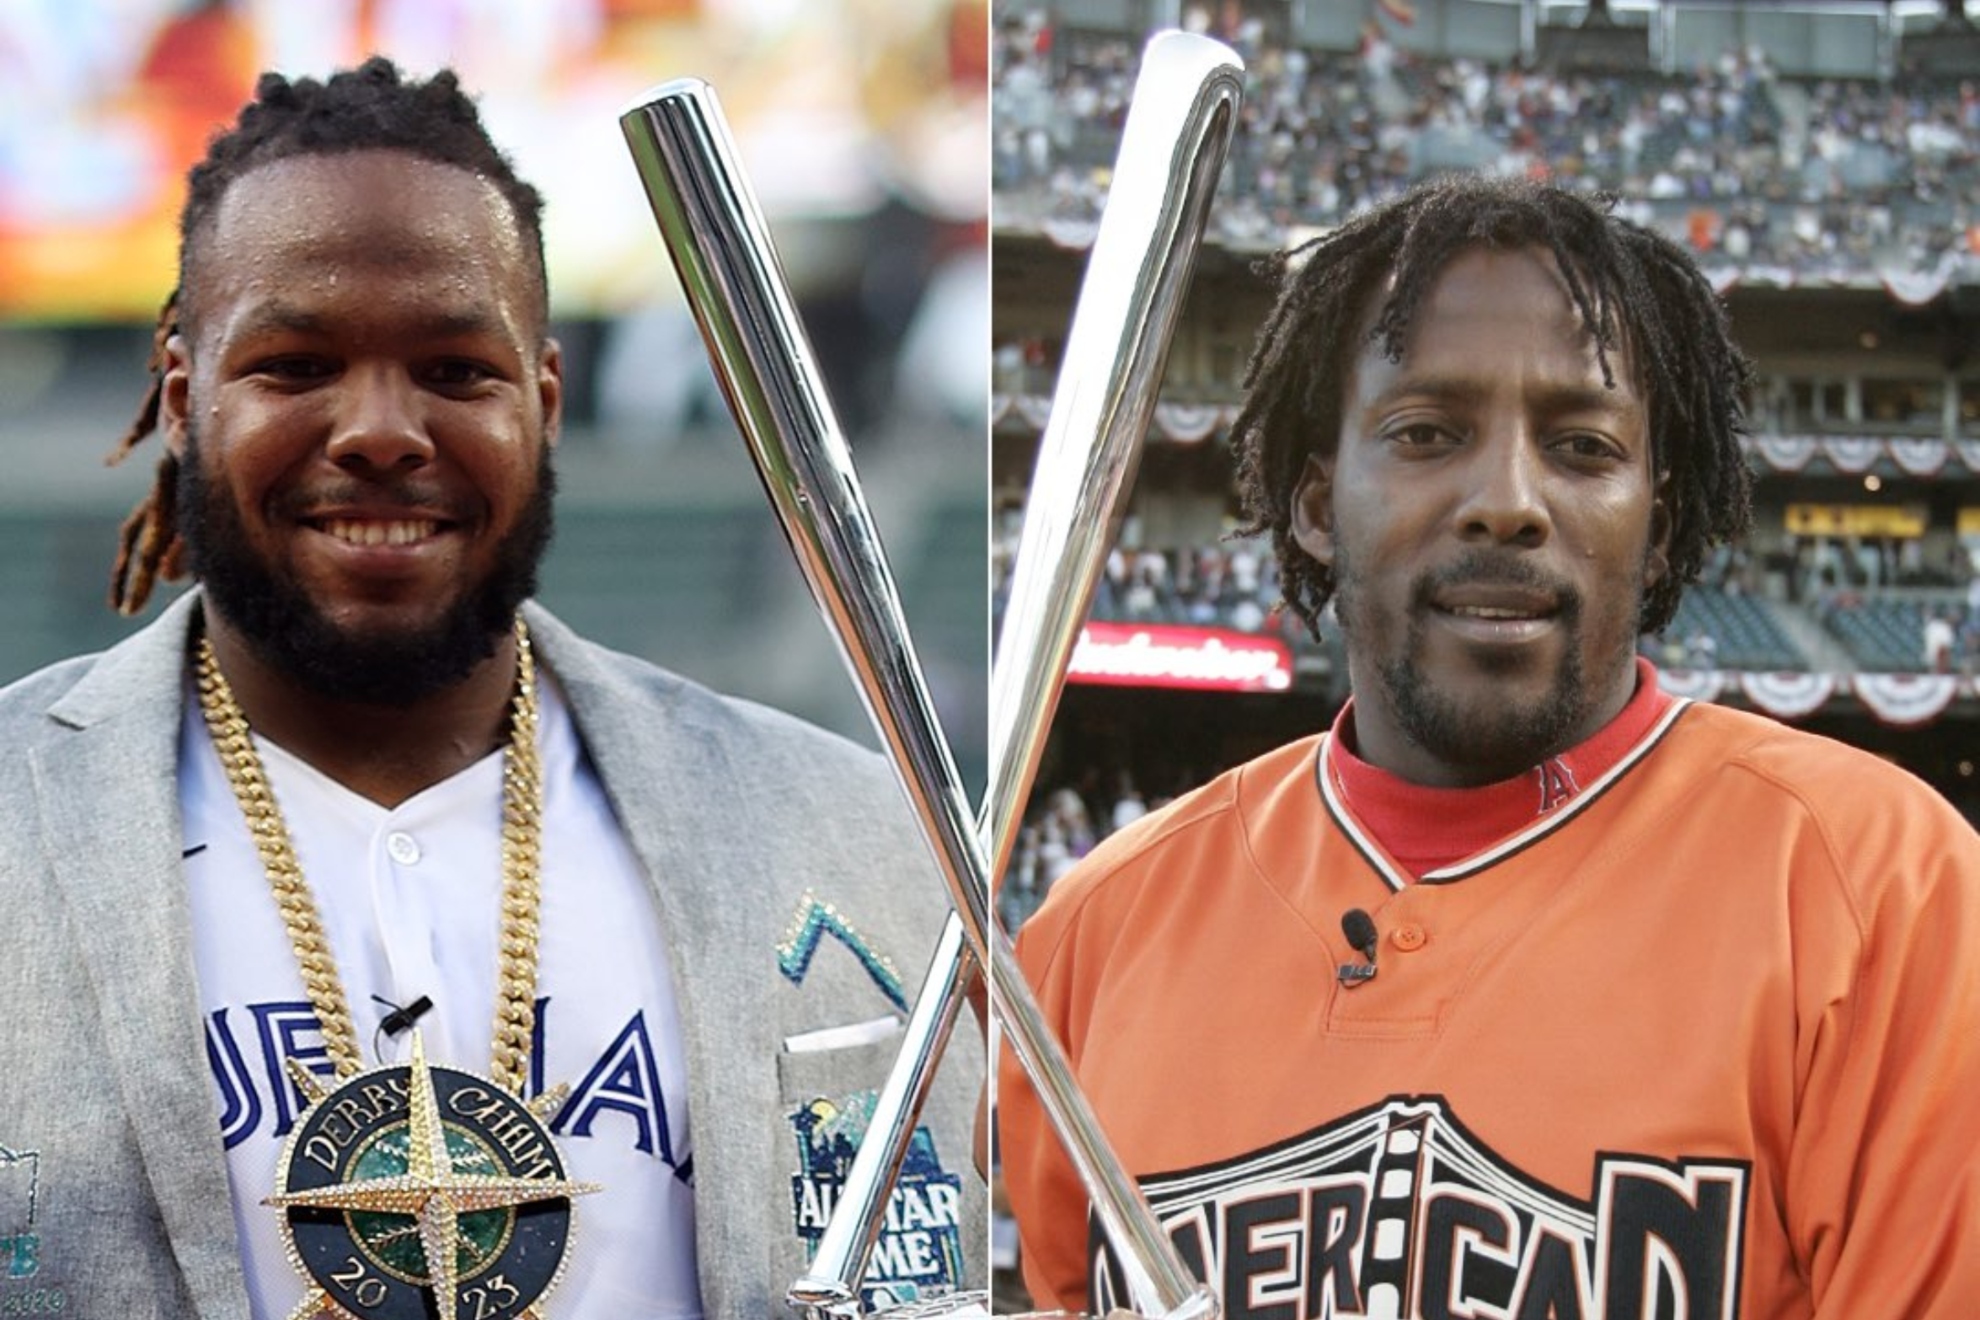 Vladimir Guerrero Jr. and Senior become first father-son duo to win MLB Home Run Derby